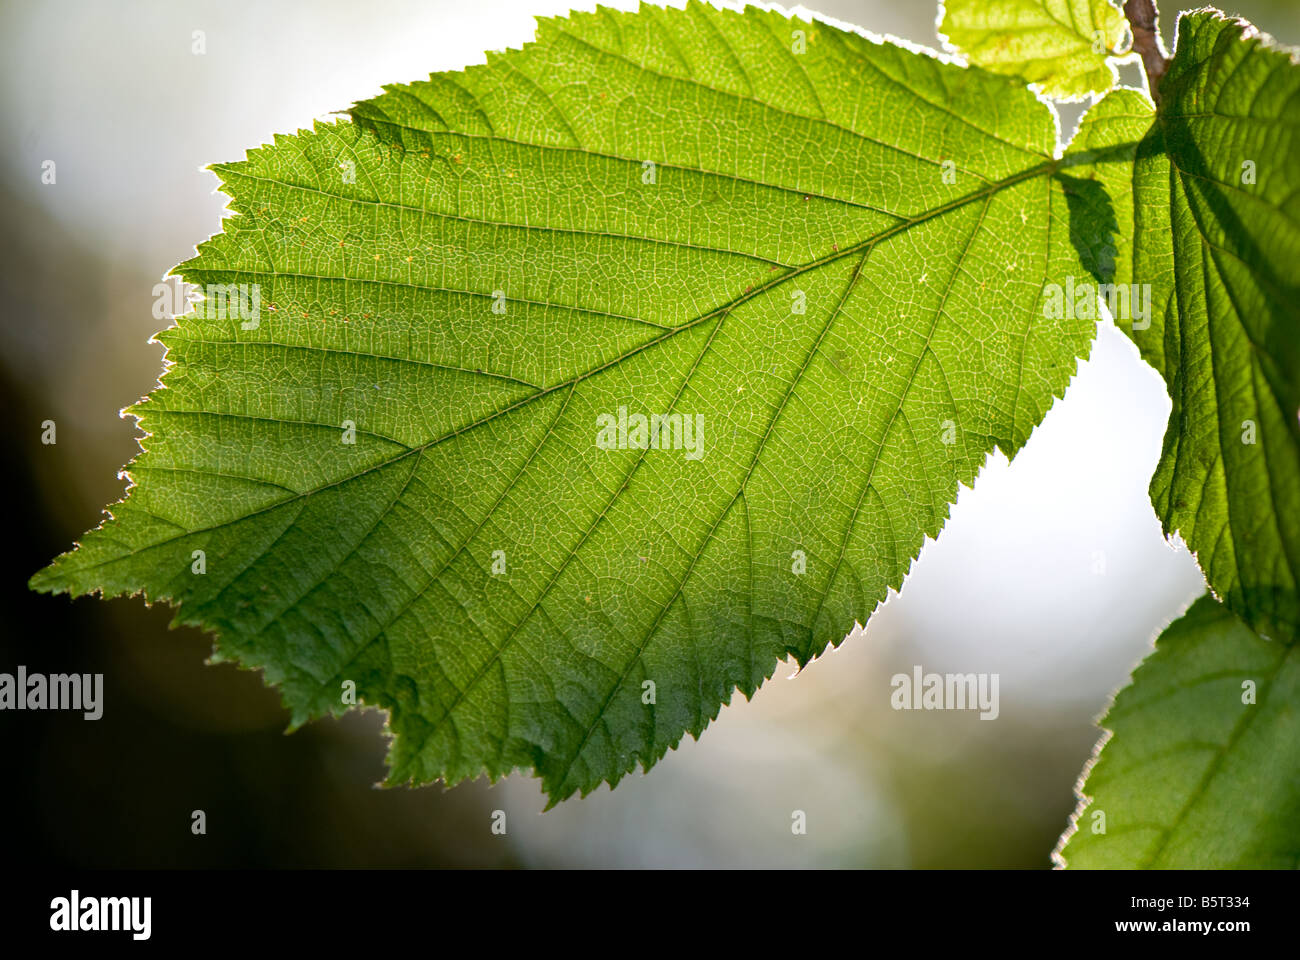 Close-up of a Hazel leaf showing lateral and main veins Stock Photo